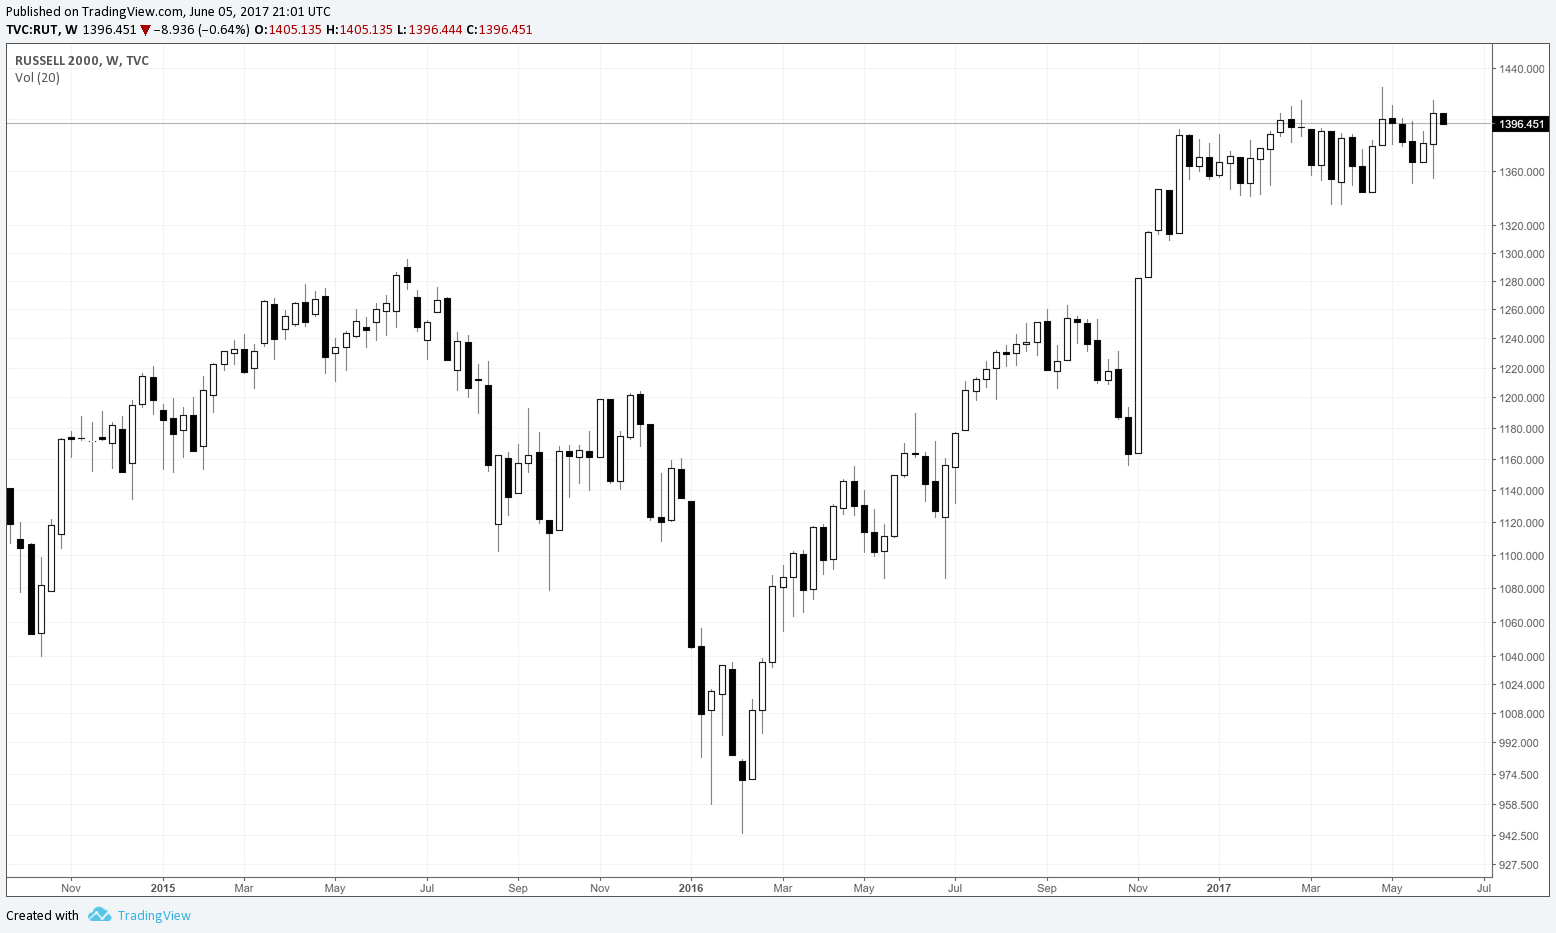 Russell 2000 Index Chart